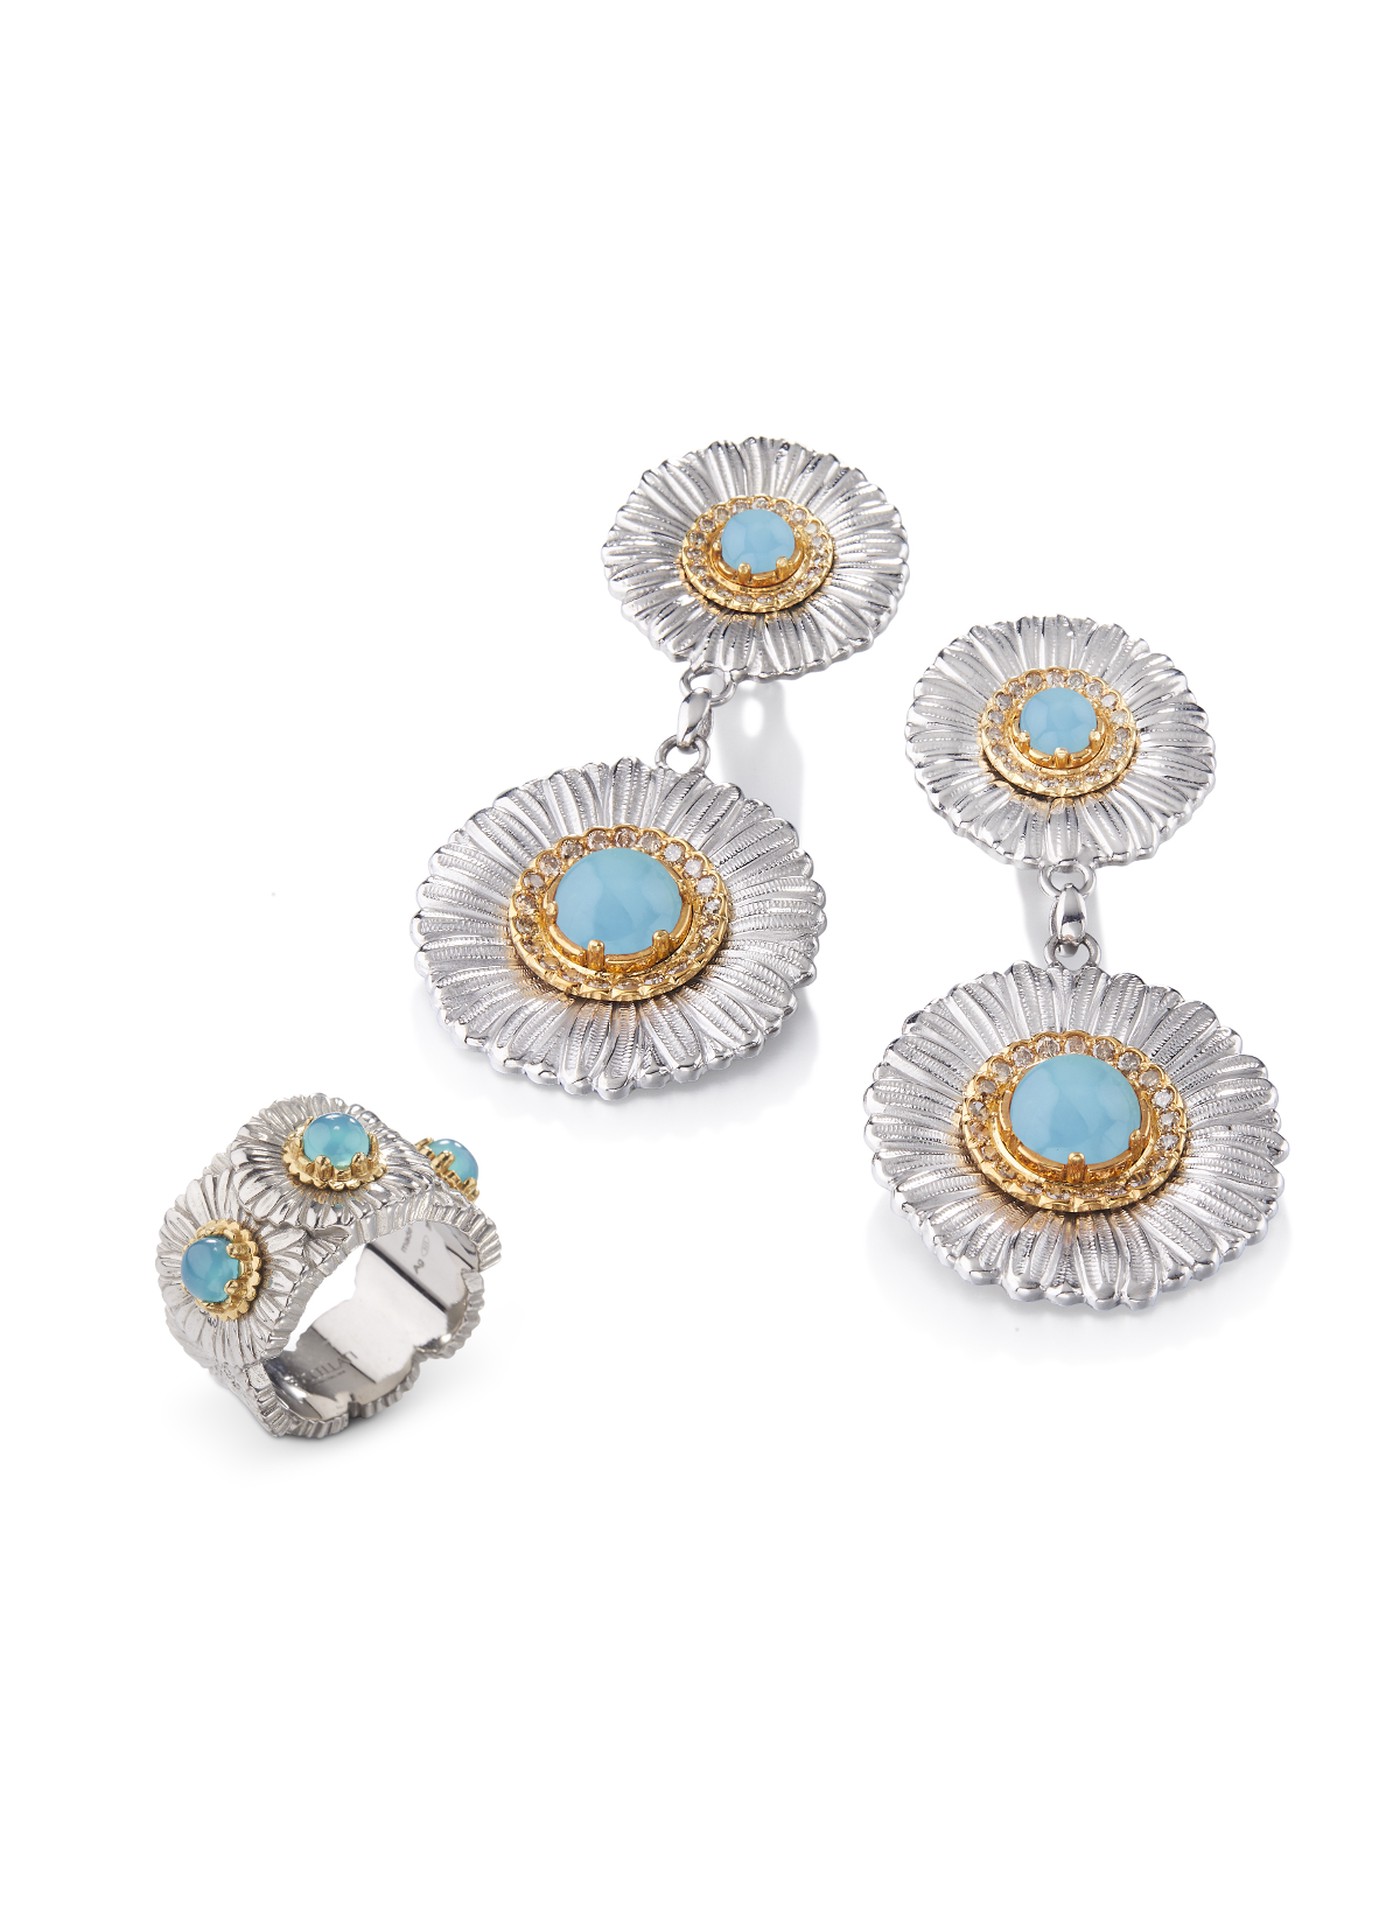 Blossoms Daisy Pendant earrings and ring in silver with diamonds and blue agate